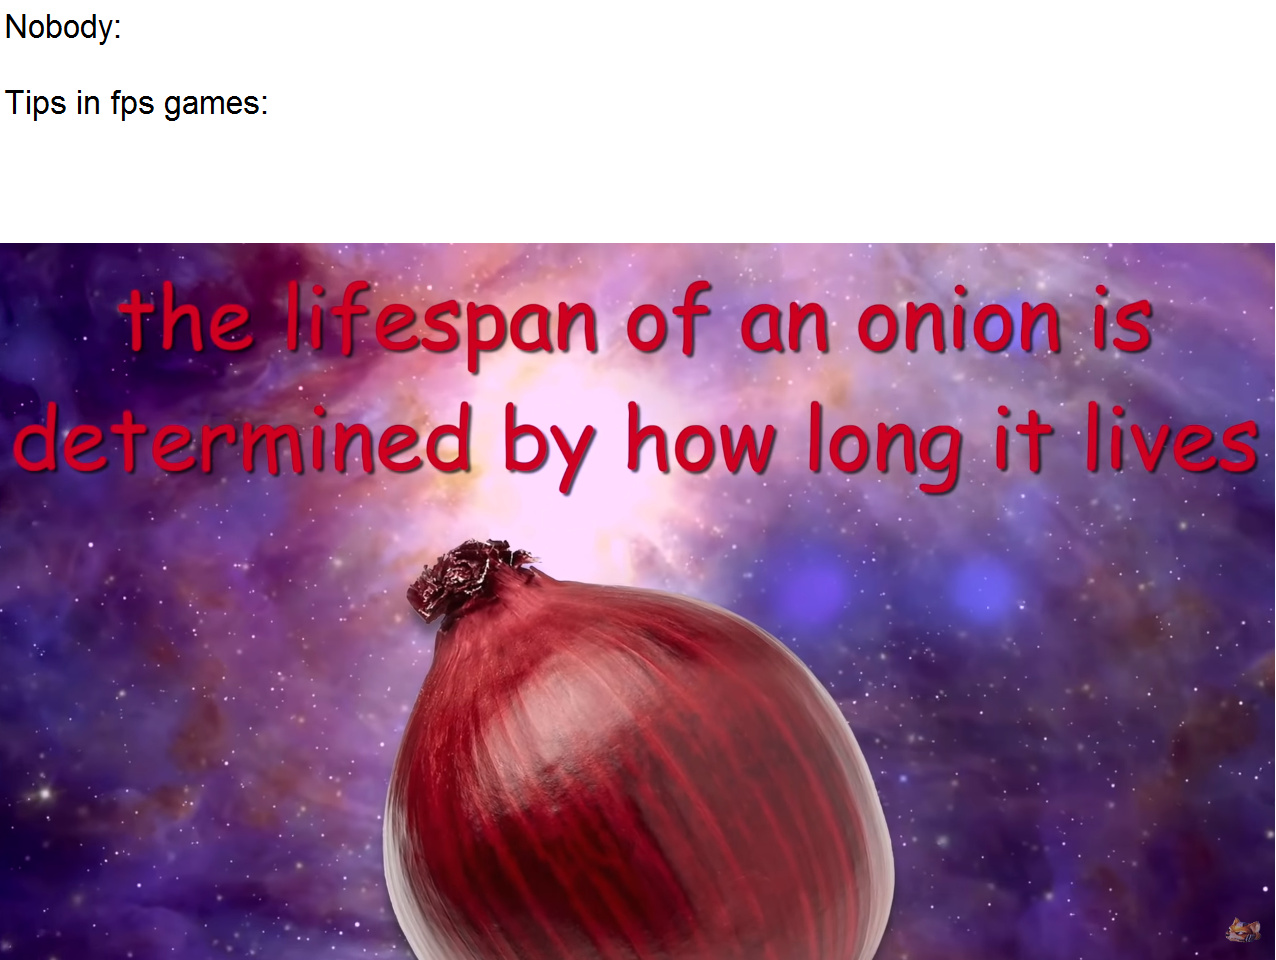 Sauce is Onion Facts by Timotainment - meme